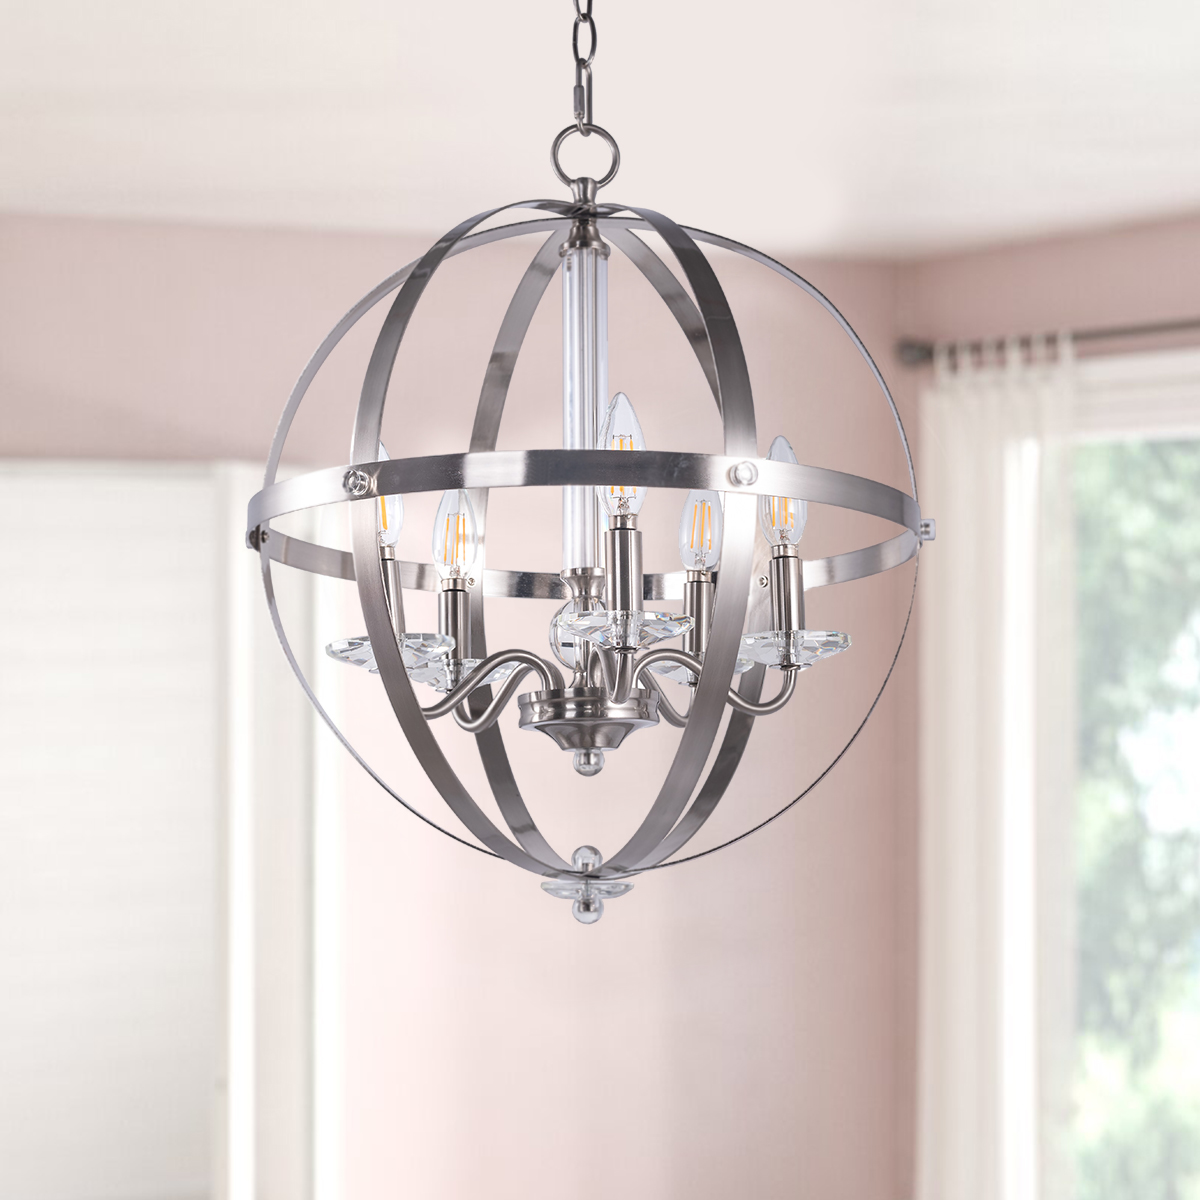 USA-Direct-5-Light-Candle-Style-Globe-Chandelier-Industrial-Rustic-Indoor-Pendant-Light-Without-Bulb-1877125-1